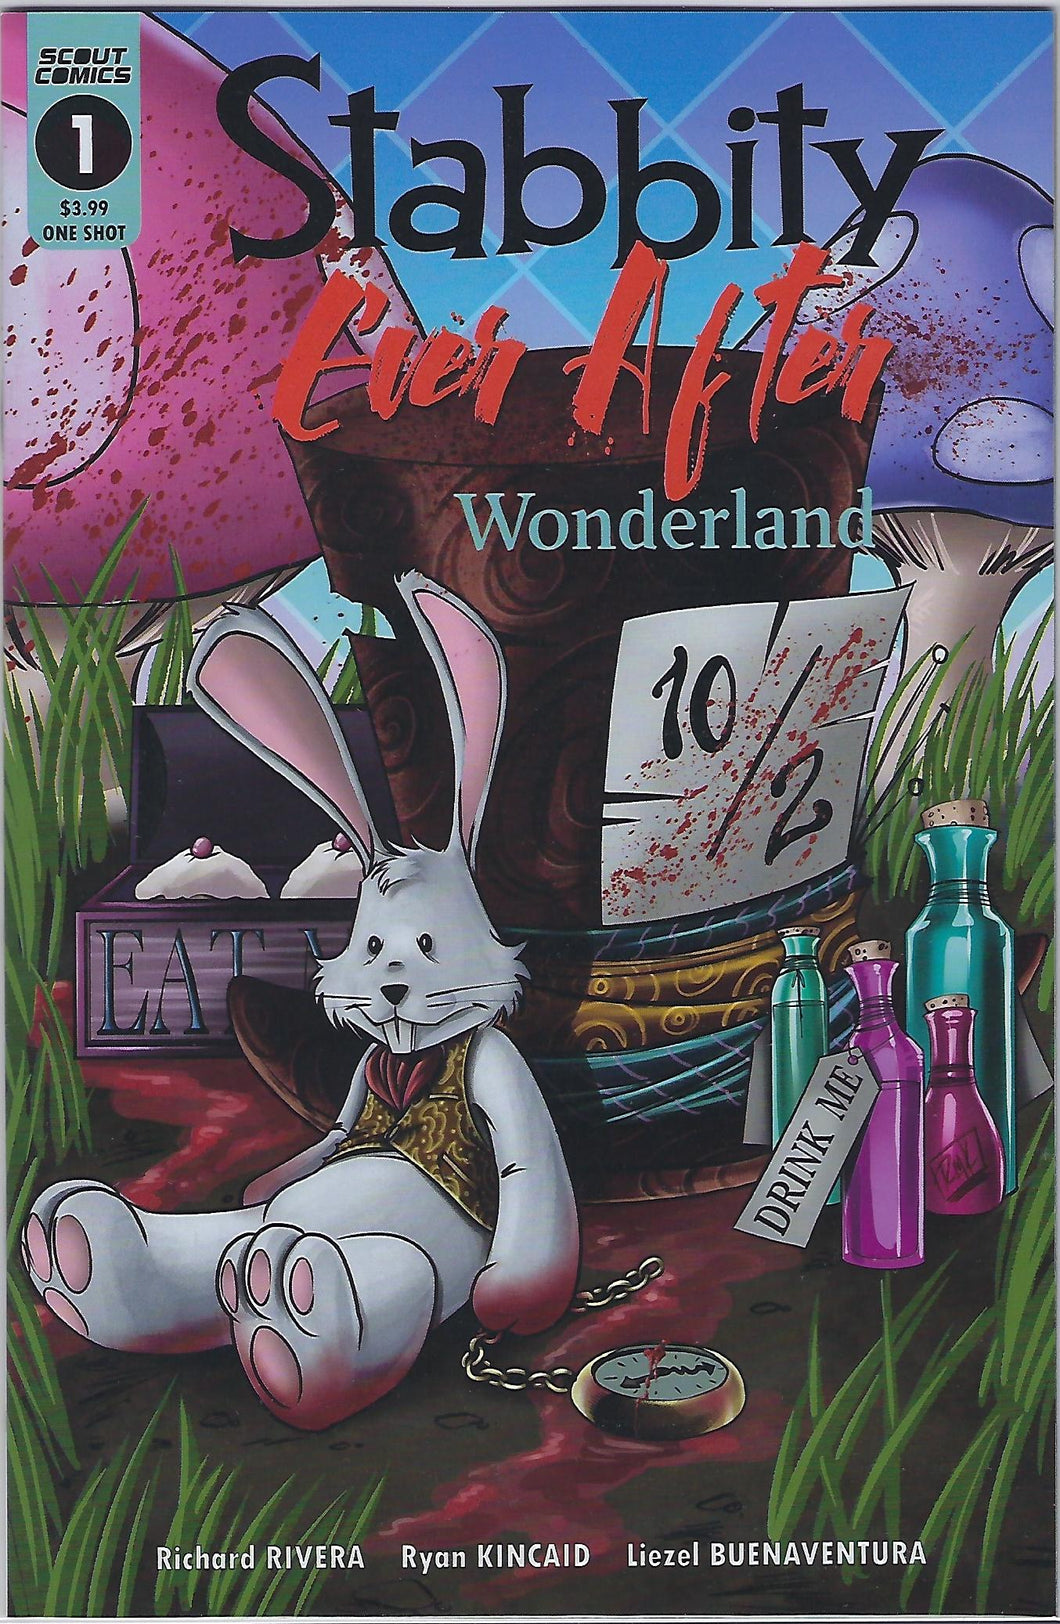 STABBITY EVER AFTER WONDERLAND # 1 RYAN KINCAID COVER  !!   SCOUT COMICS !!   NM